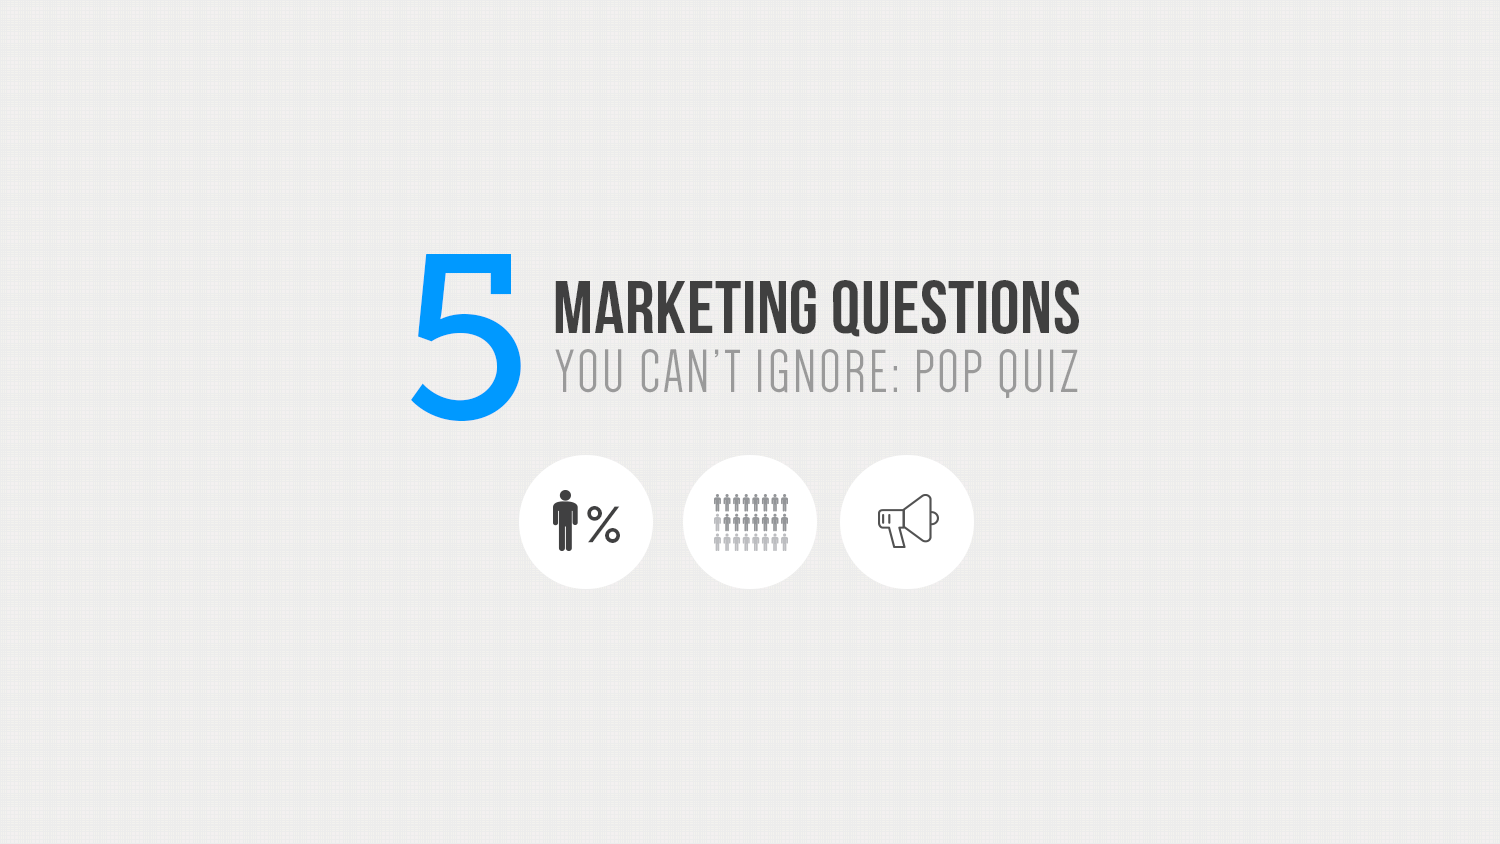 5 Marketing Questions You can't ignore with infographic